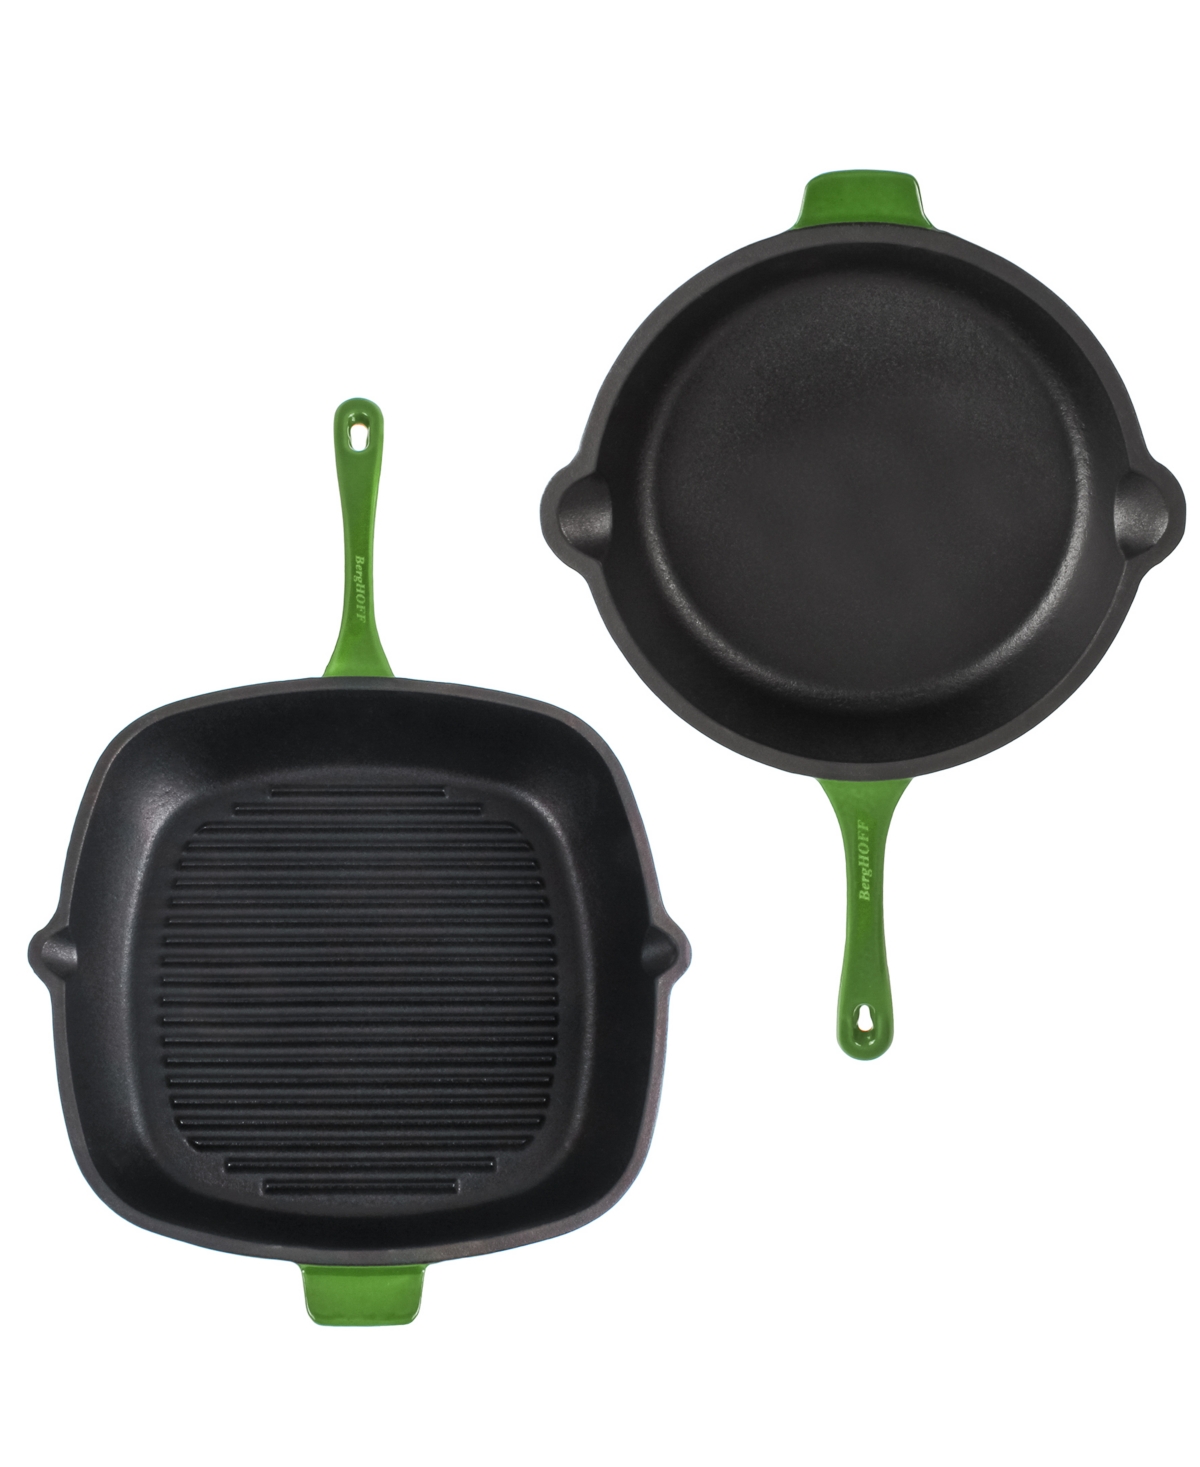 Neo Cast Iron 11 Grill Pan and 10 Fry Pan, Set of 2